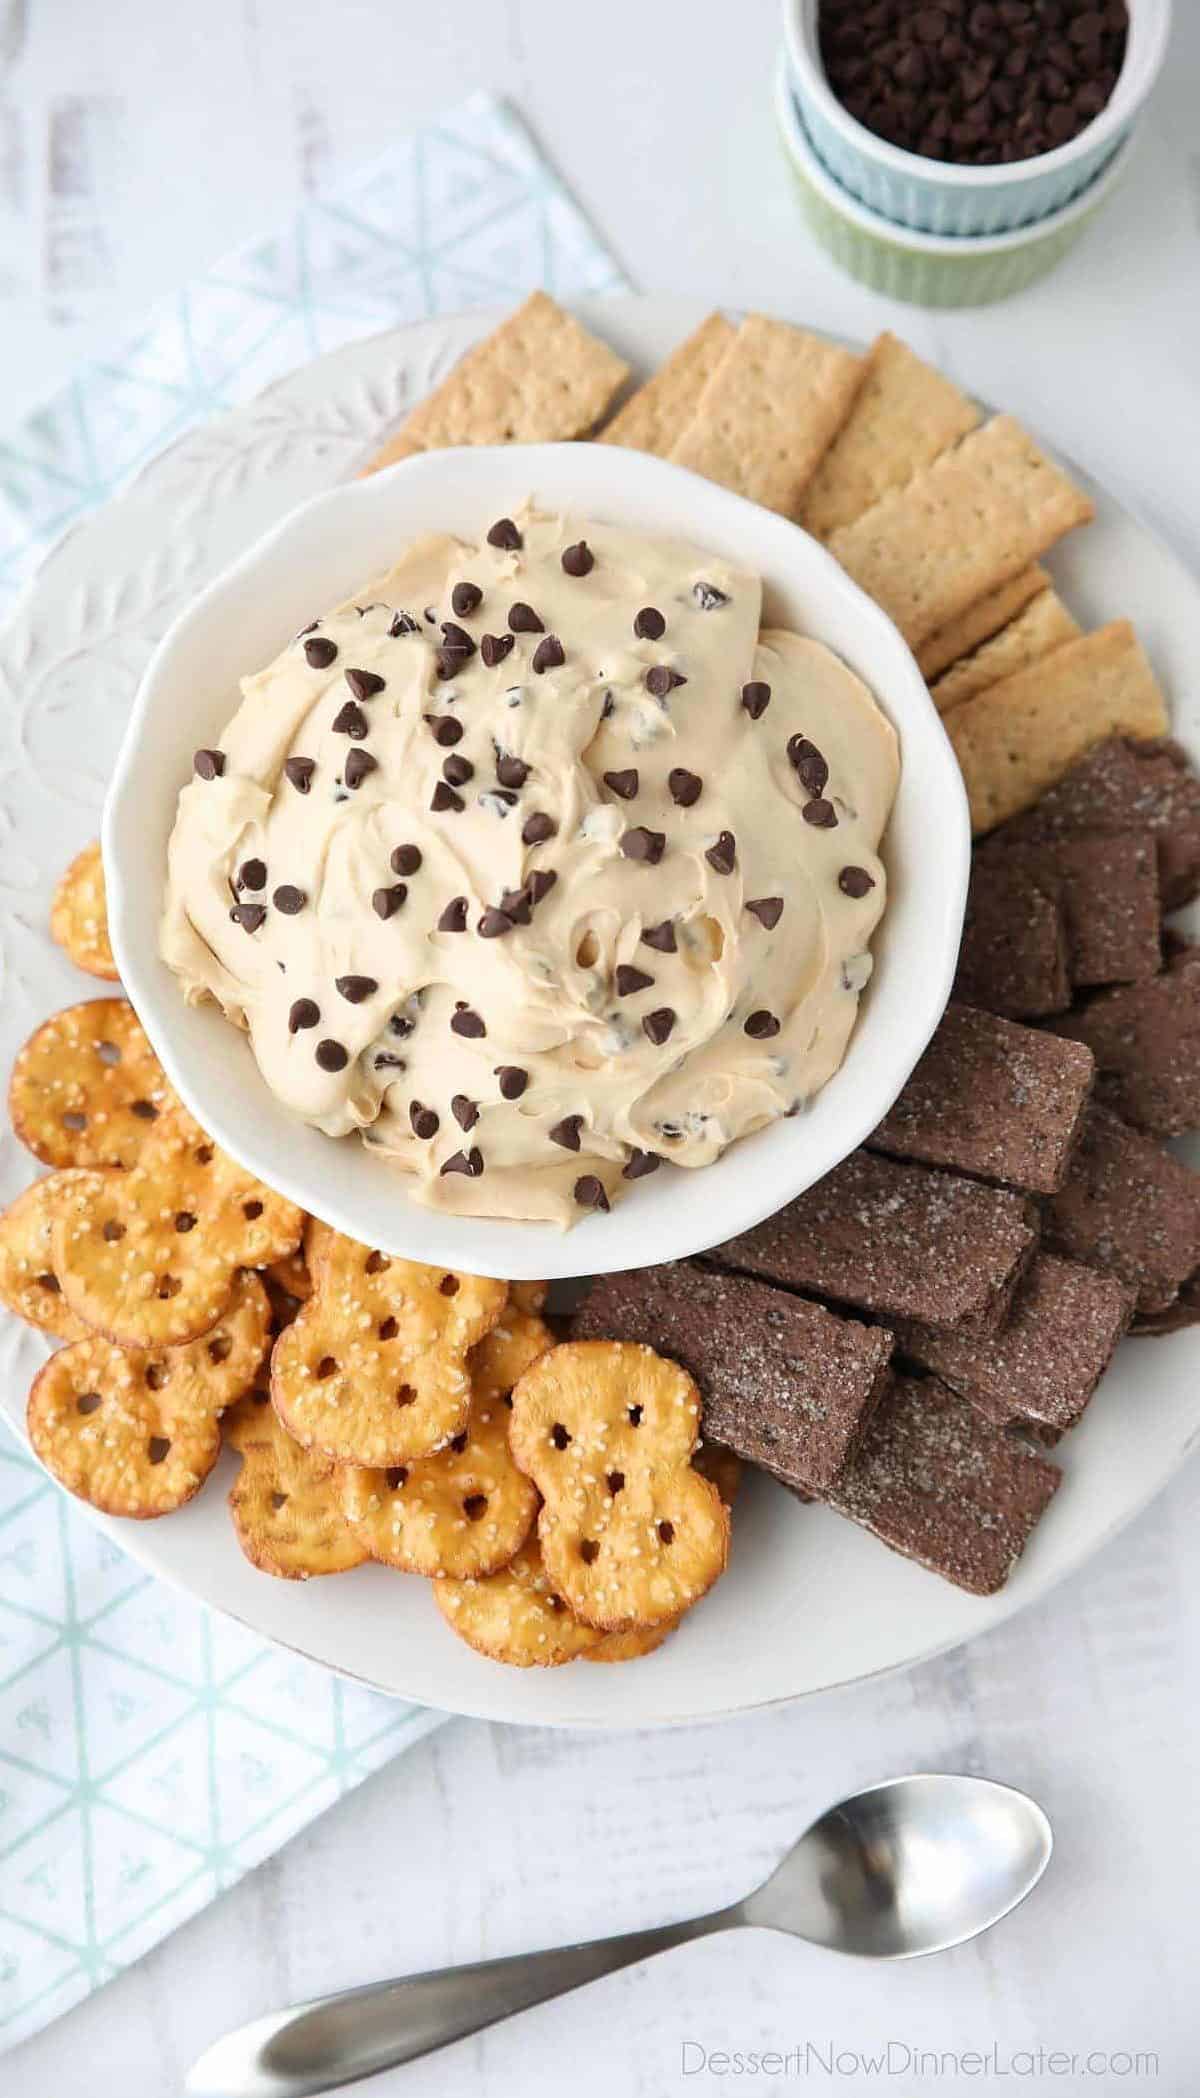  Who needs a campfire when you can have Buckeye Dip?